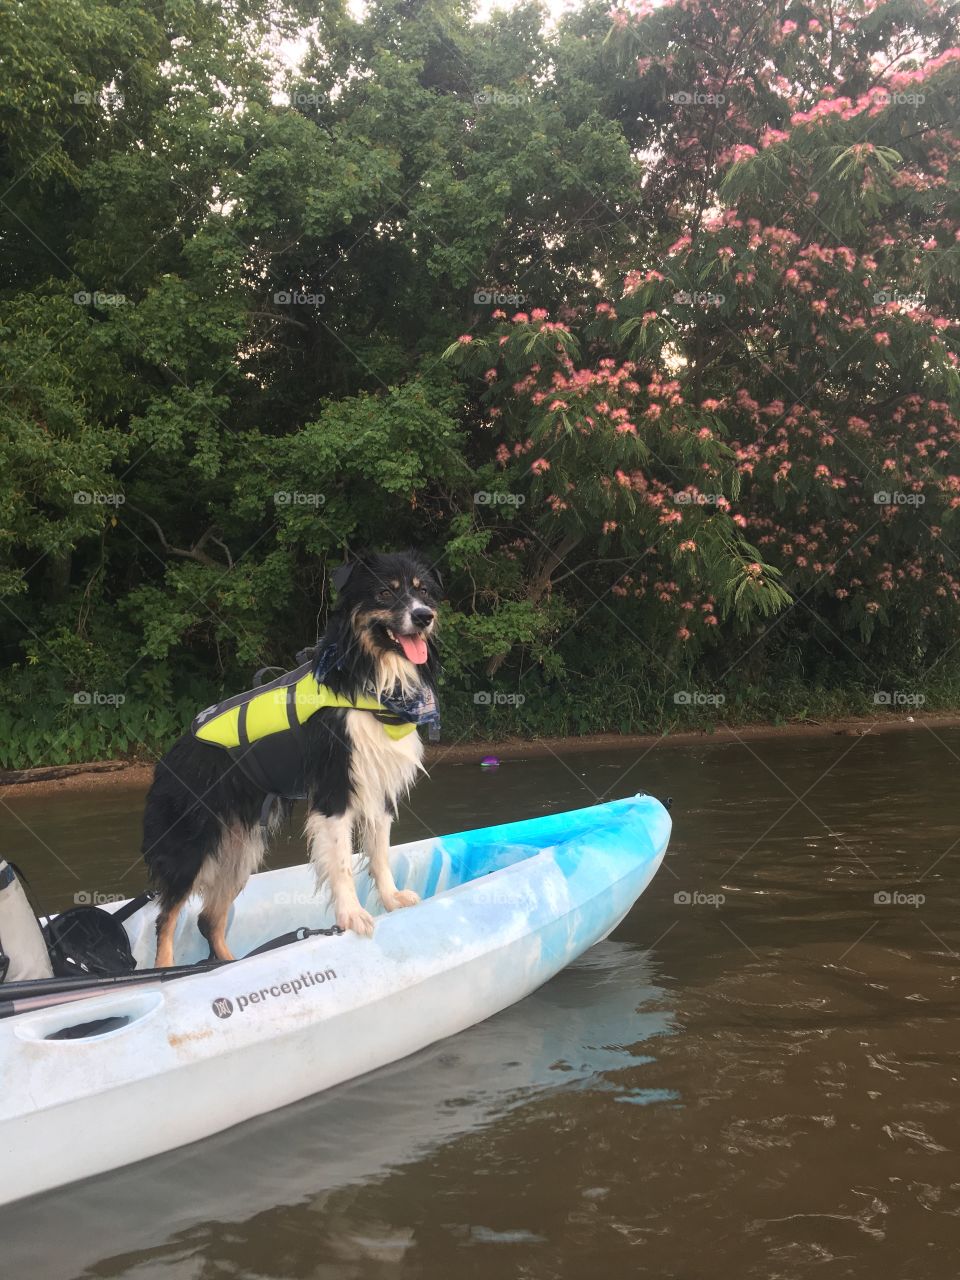 Kayaking with the dog 